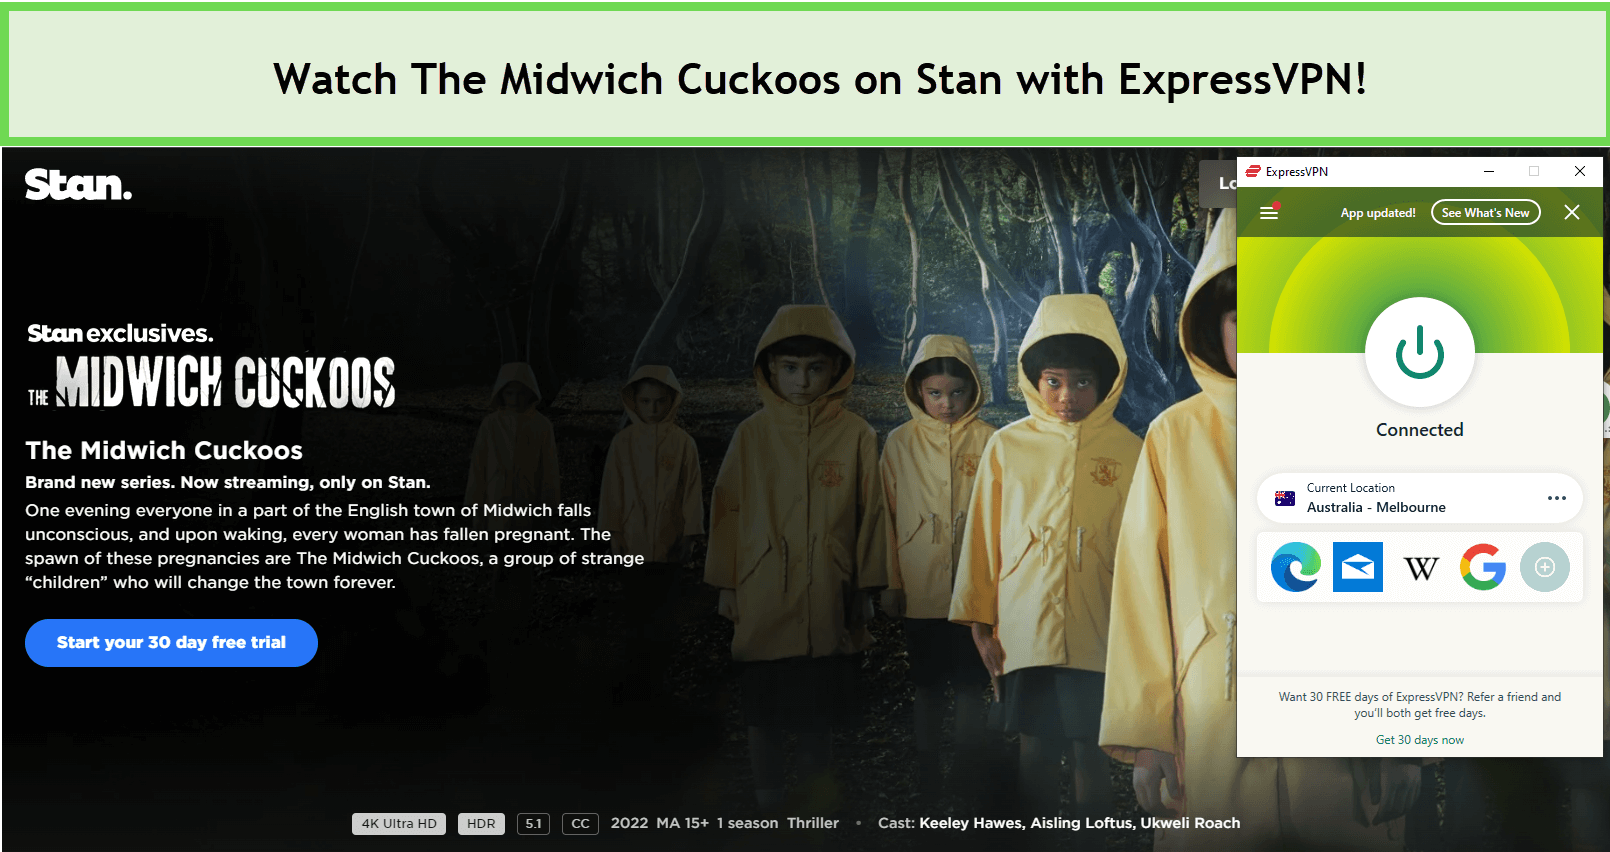 Watch-The-Midwich-Cuckoos-in-India-on-Stan-with-ExpressVPN